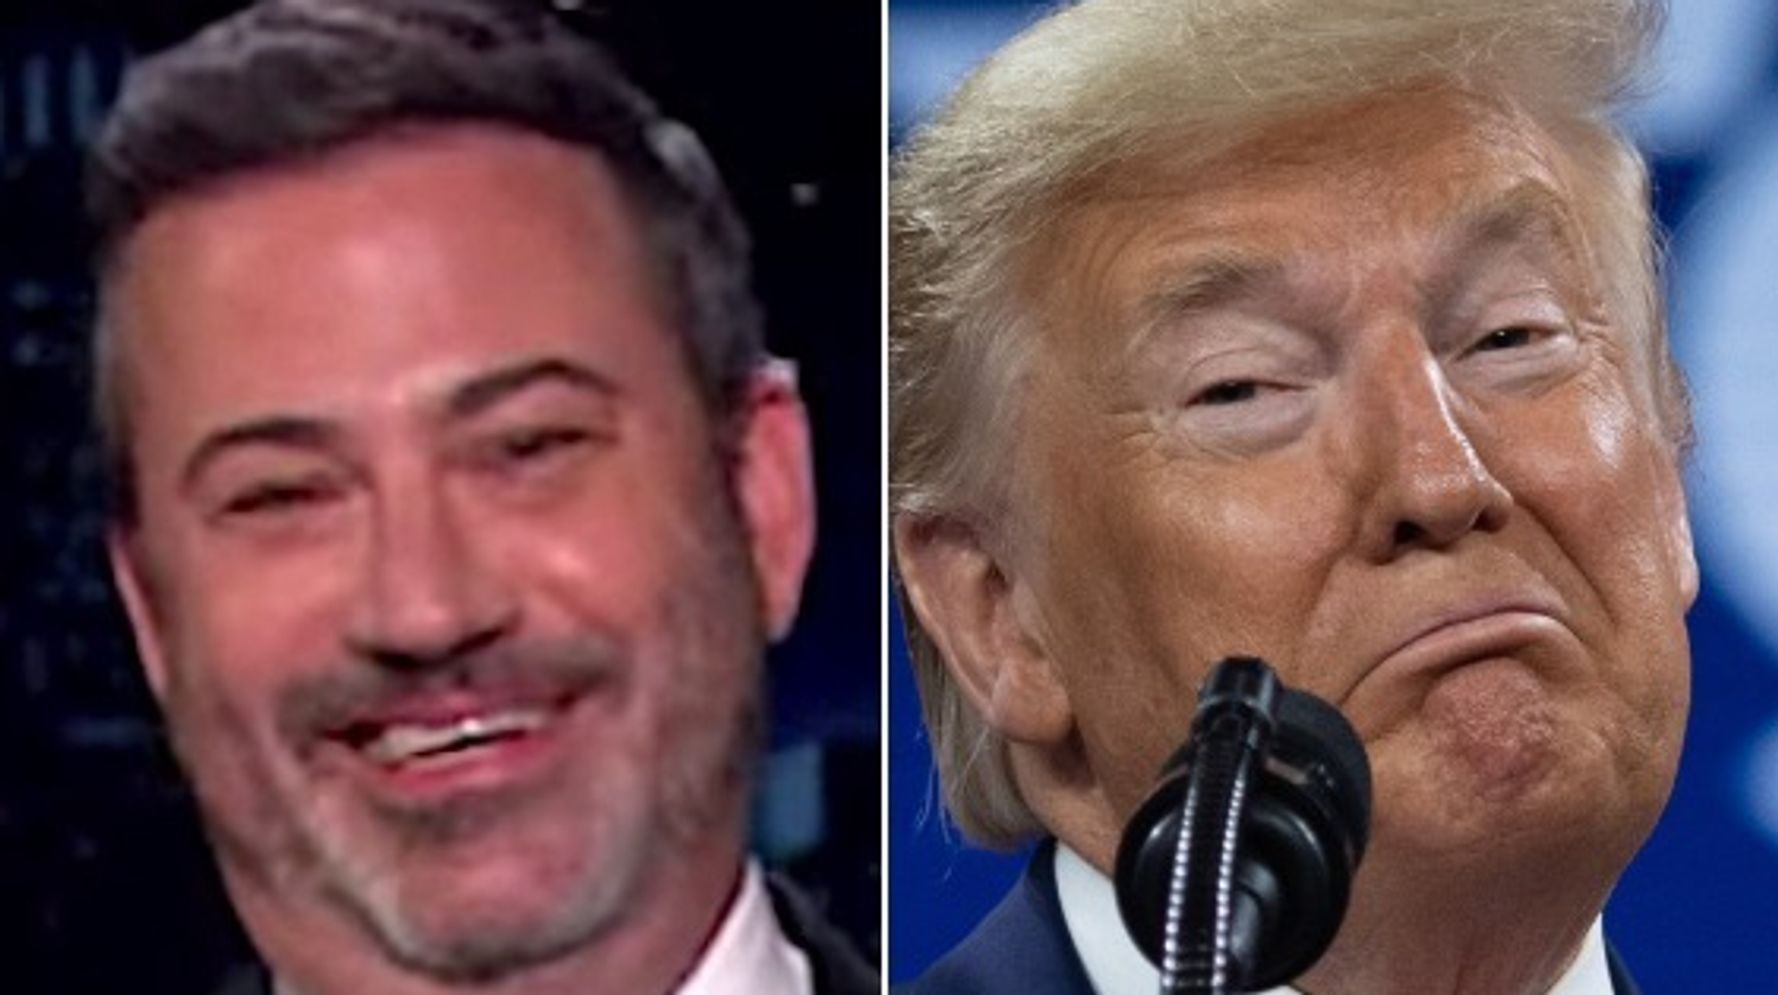 Jimmy Kimmel Reveals The Words That Could Haunt Trump If He Faces Prison Time